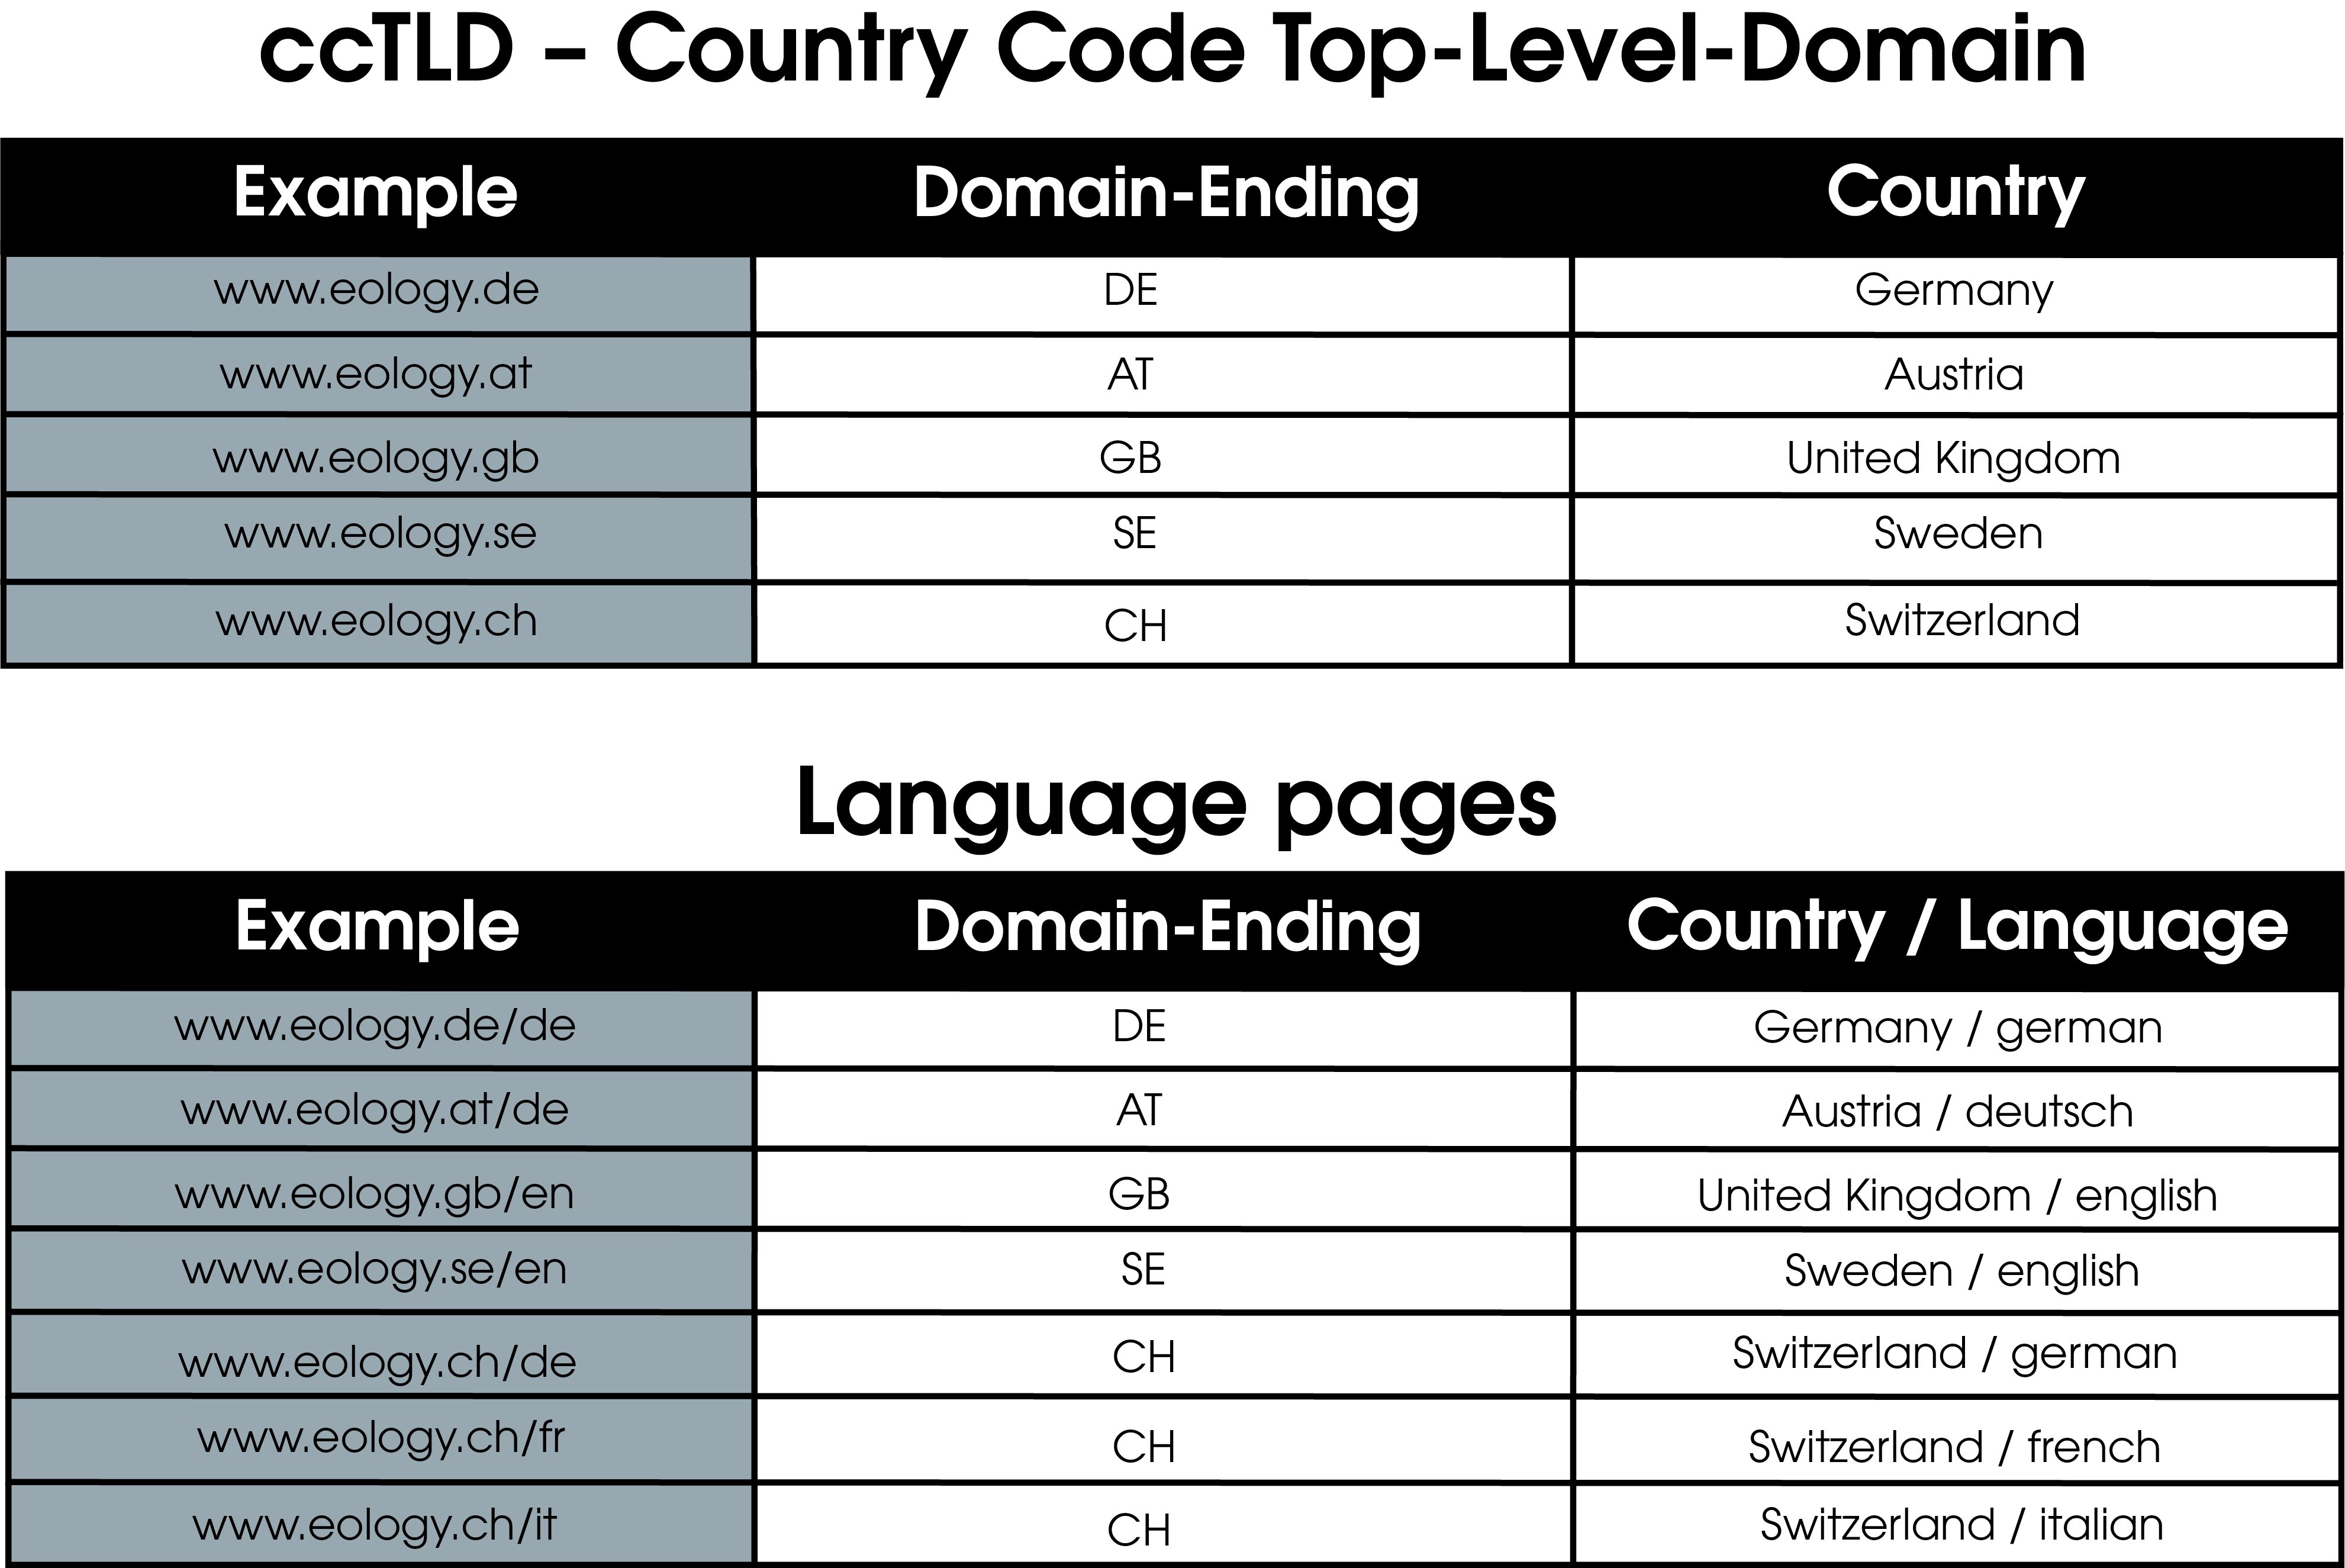 The image shows a tabular representation of how Country Code Top-Level Domains look like for the countries Germany, Austria, Great Britain, Sweden and Switzerland. It also shows possible forms of language pages for the above countries. 